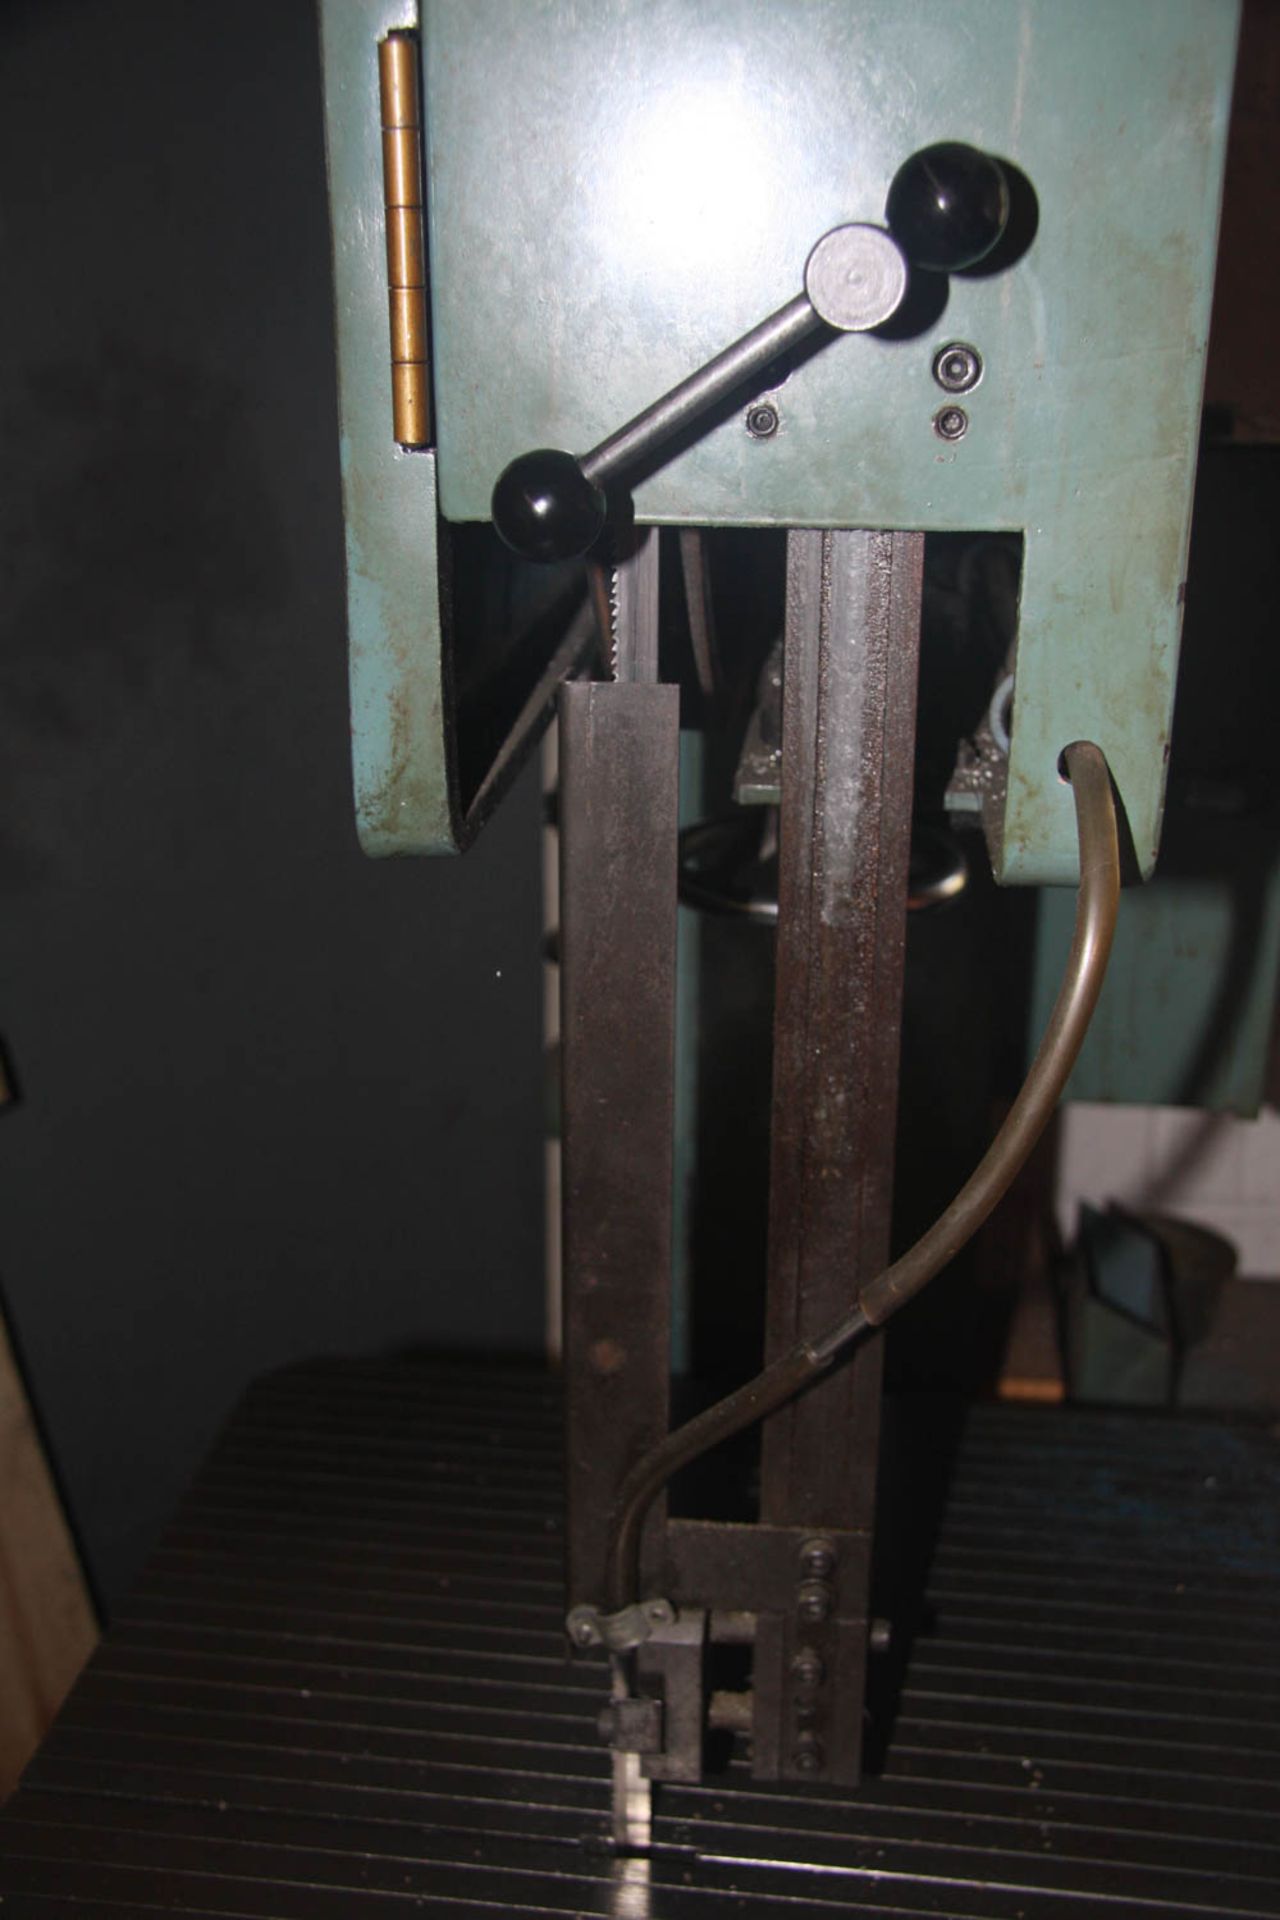 MSC MDL. DCM-4-951437 16" VERTICAL BANDSAW, VARI-SPEED, WITH 19-1/2" X 23-1/4" TILTING TABLE, BUTT - Image 6 of 6